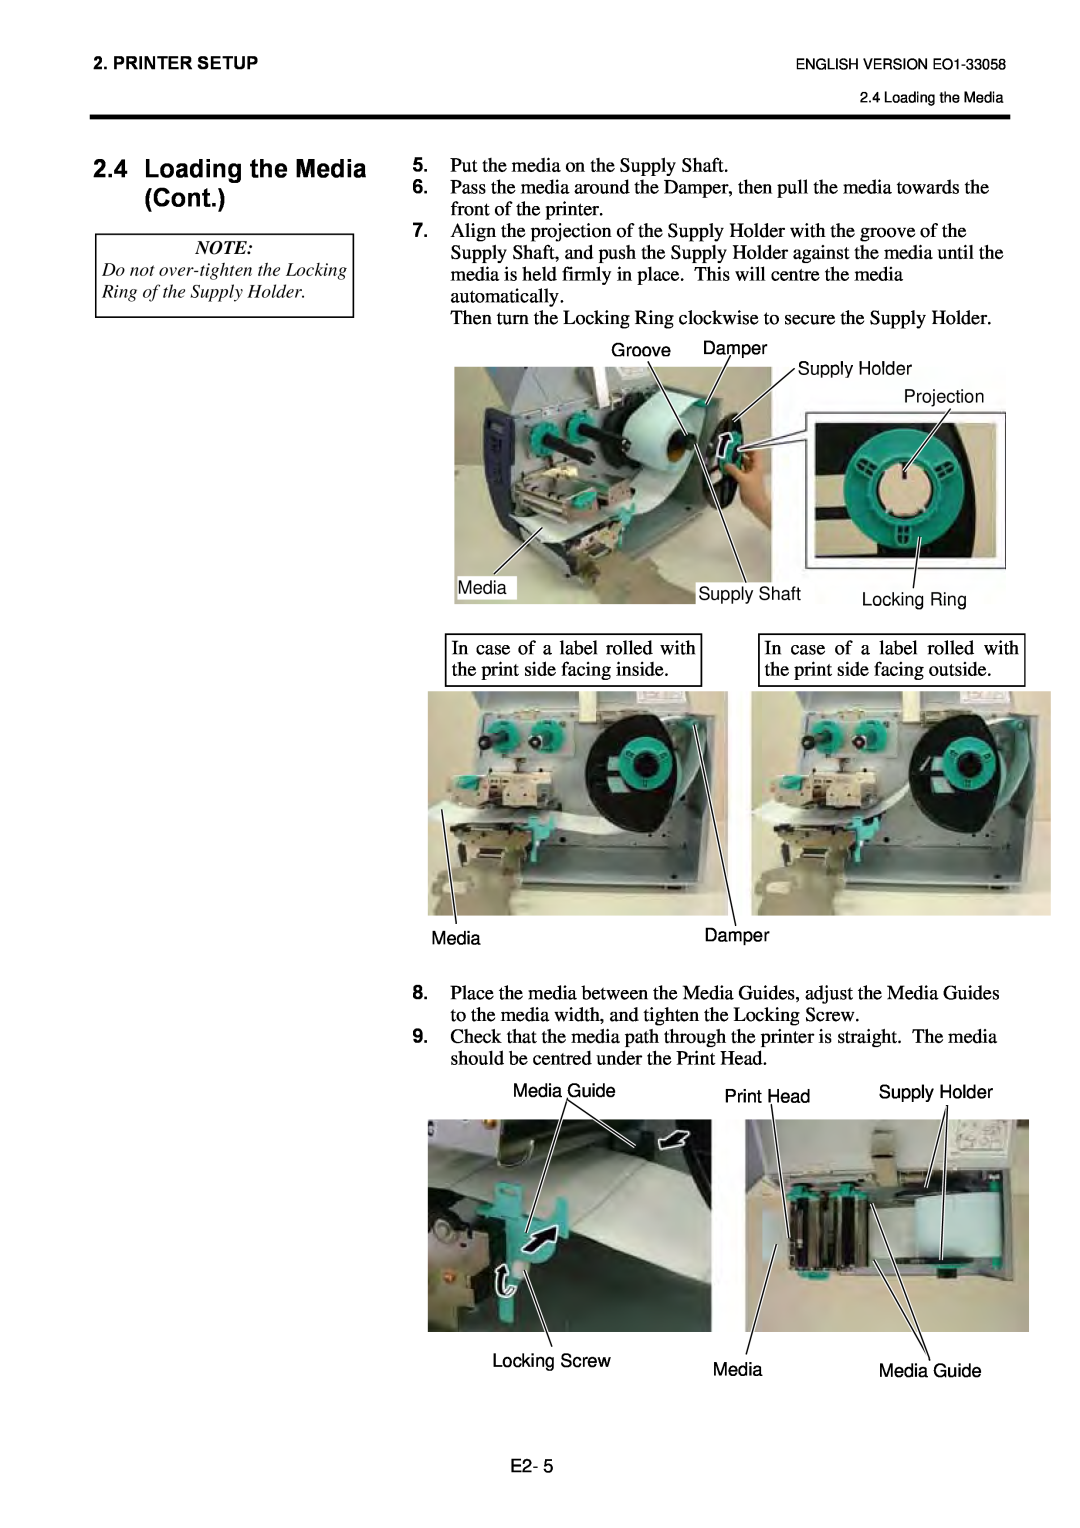 Toshiba B-SX4T owner manual Loading the Media Cont, Do not over-tighten the Locking Ring of the Supply Holder 